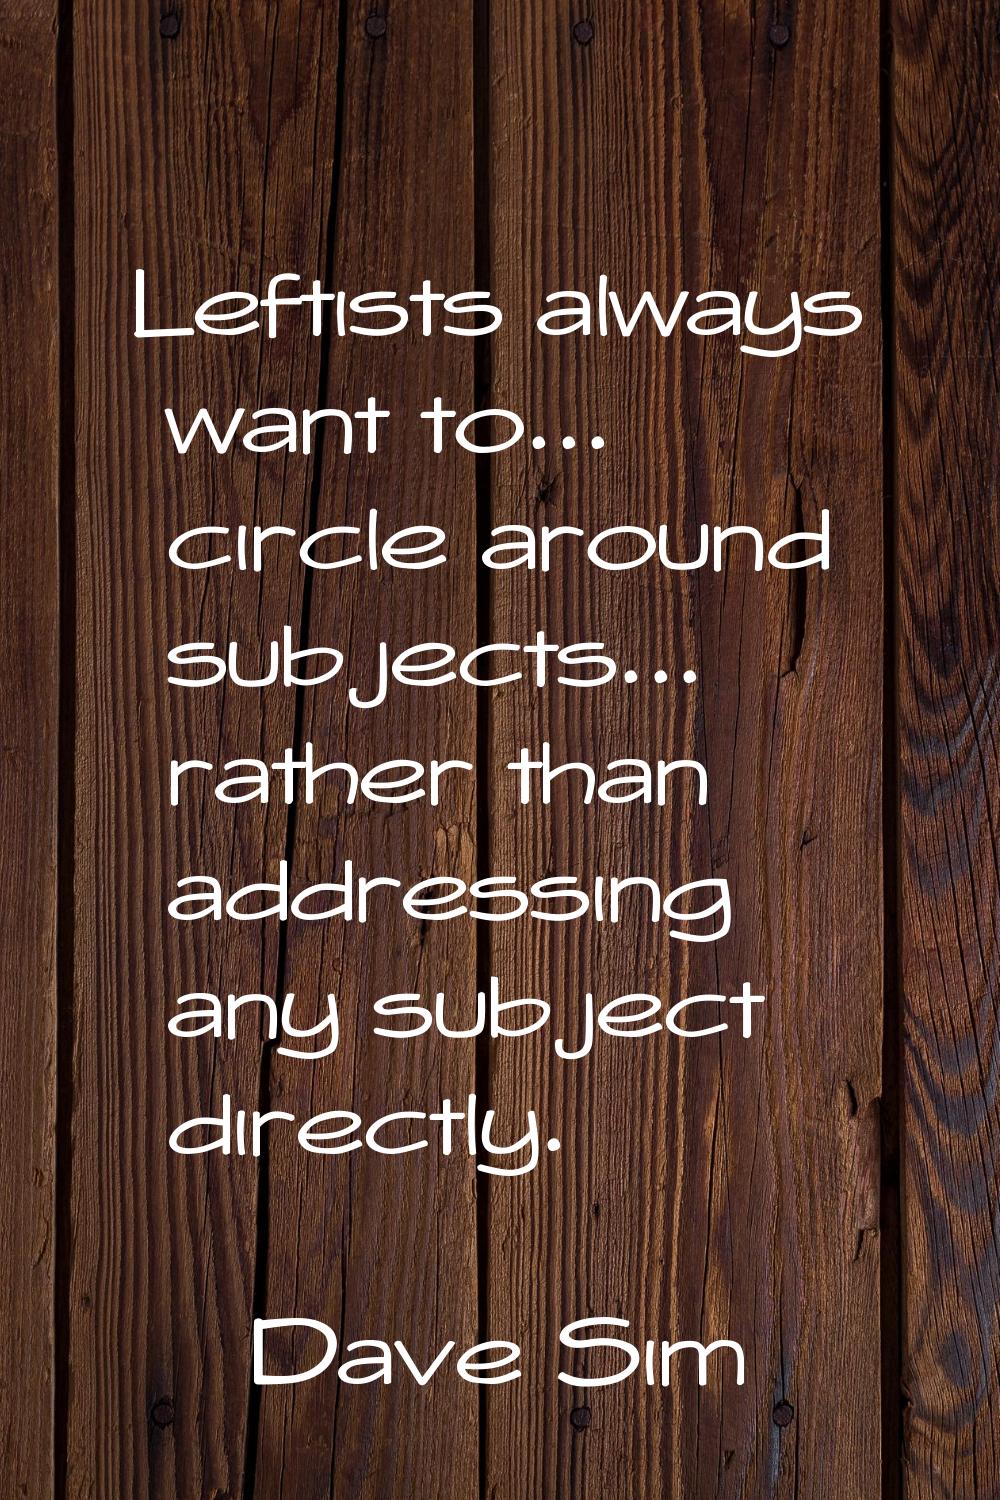 Leftists always want to... circle around subjects... rather than addressing any subject directly.